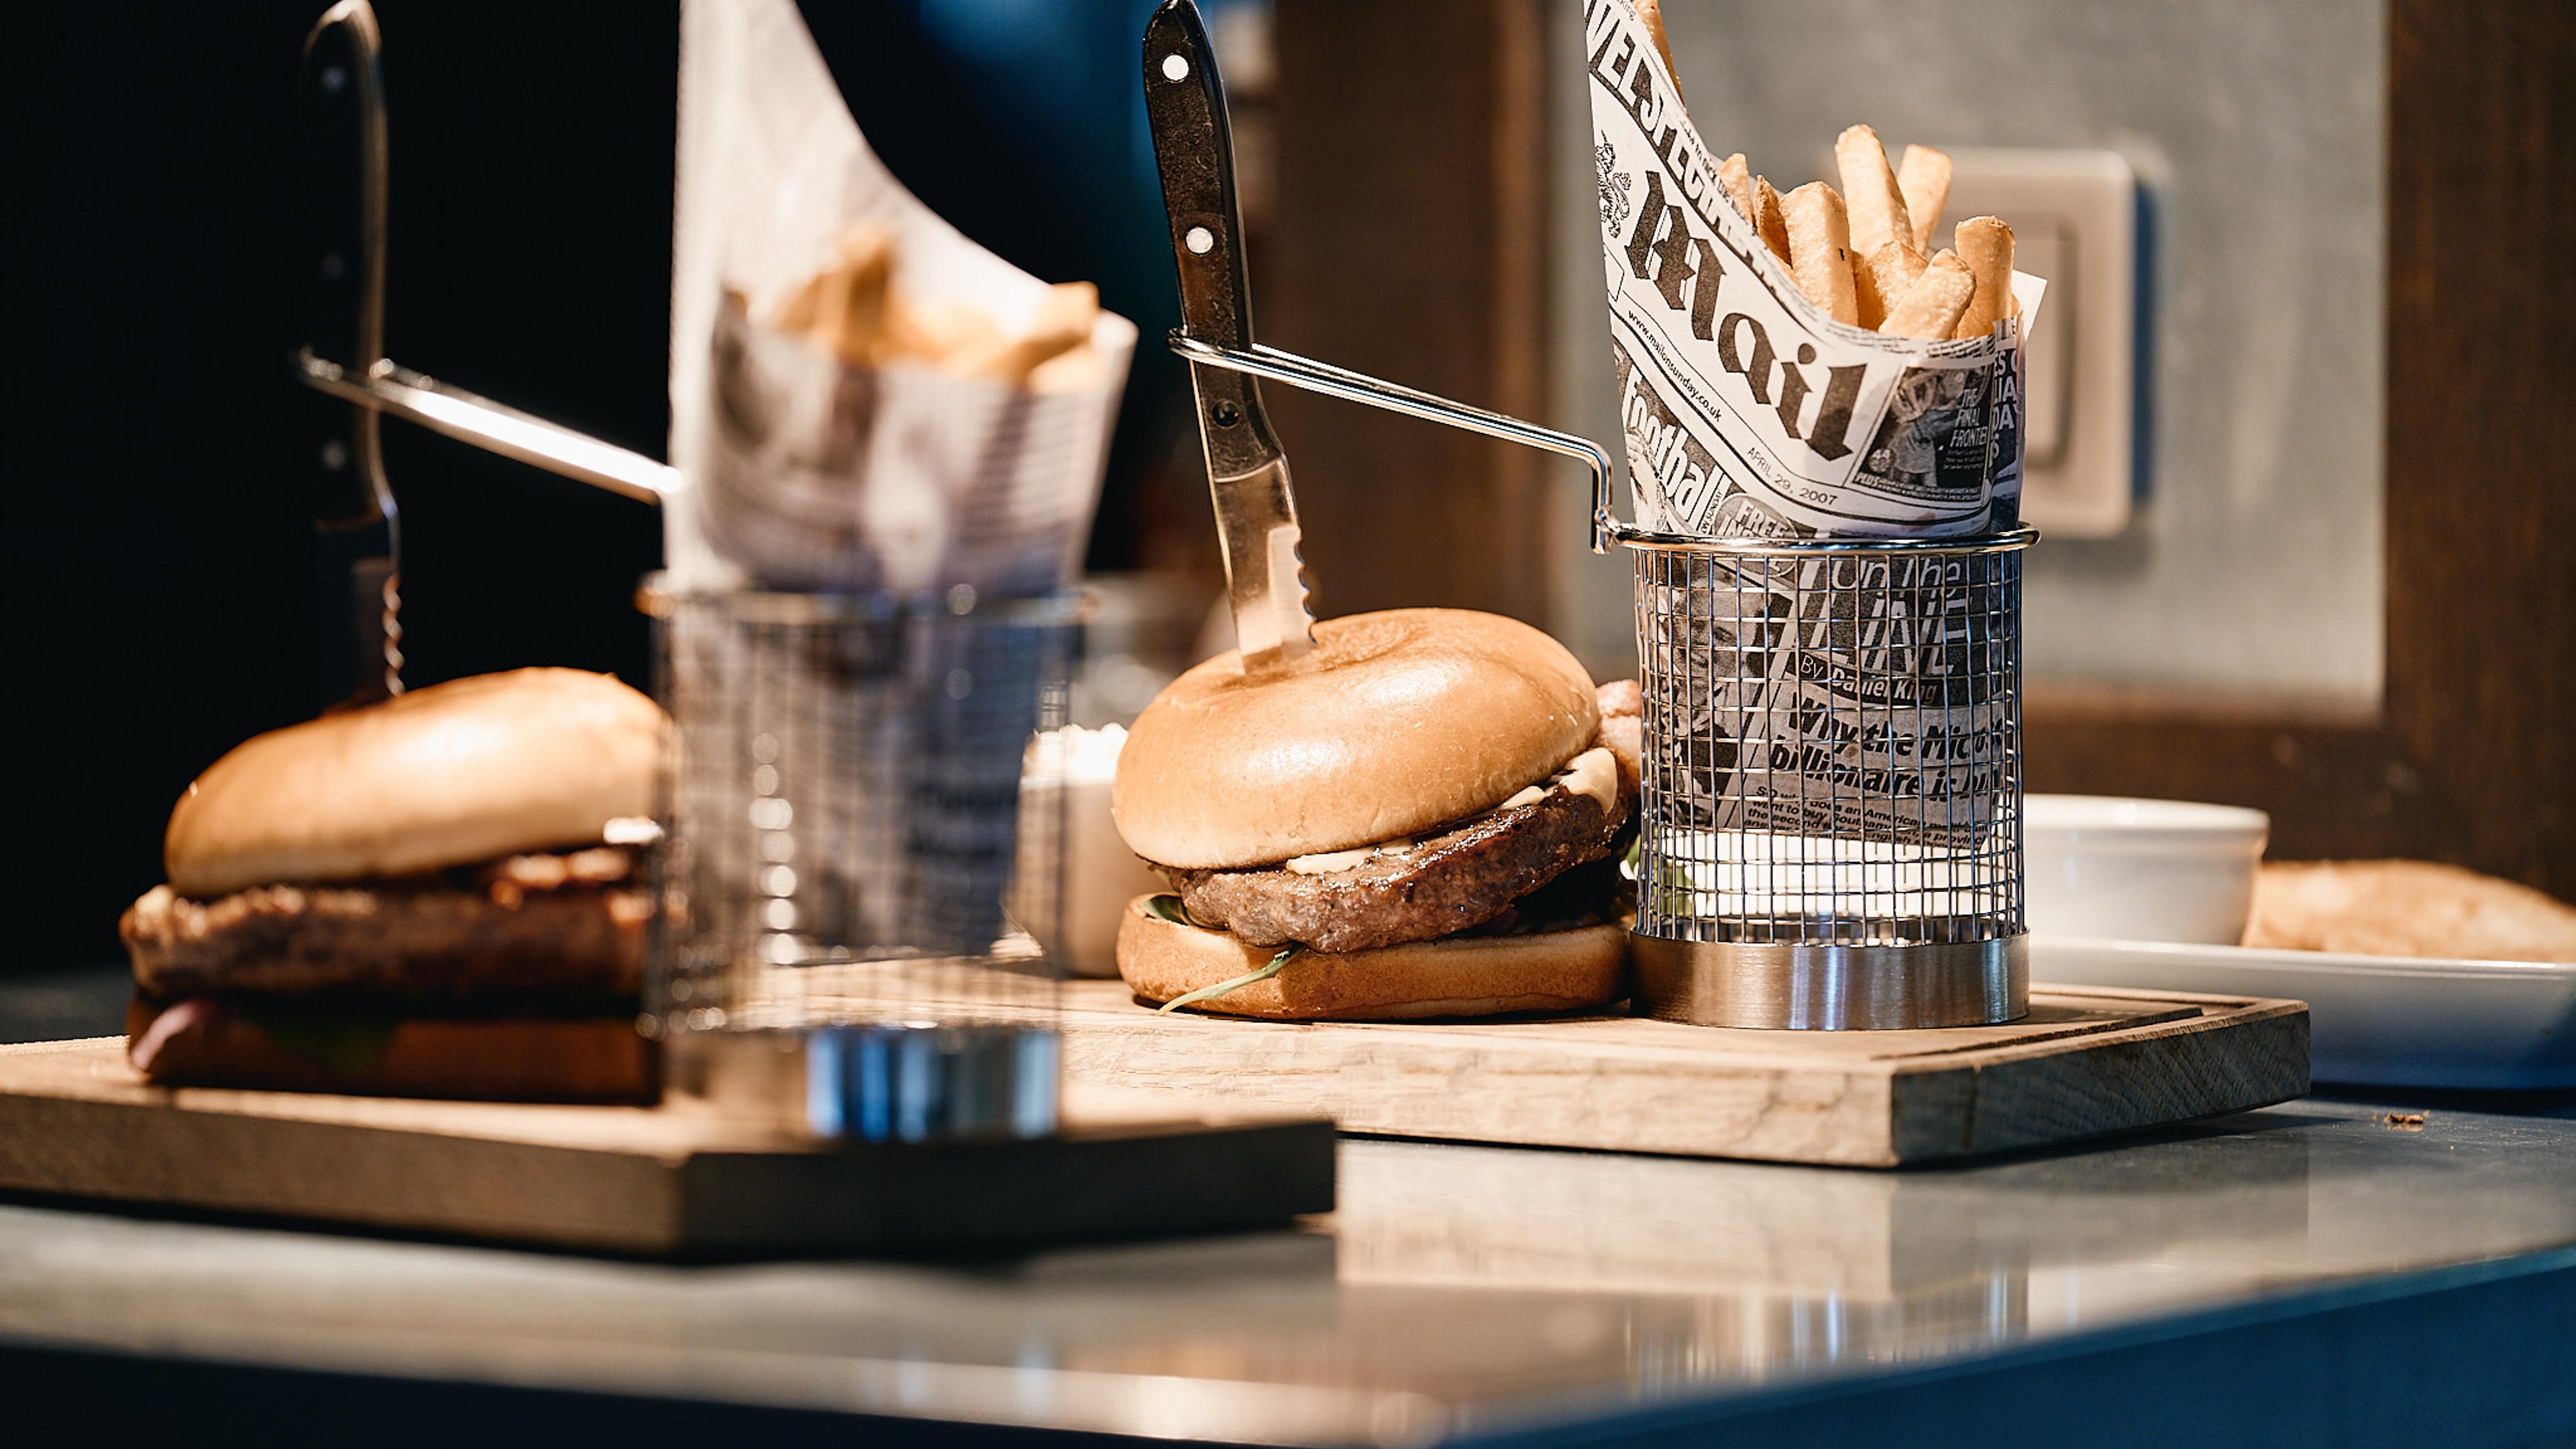 Hamburgers and fries that are ready to be served to guests in the restaurant.